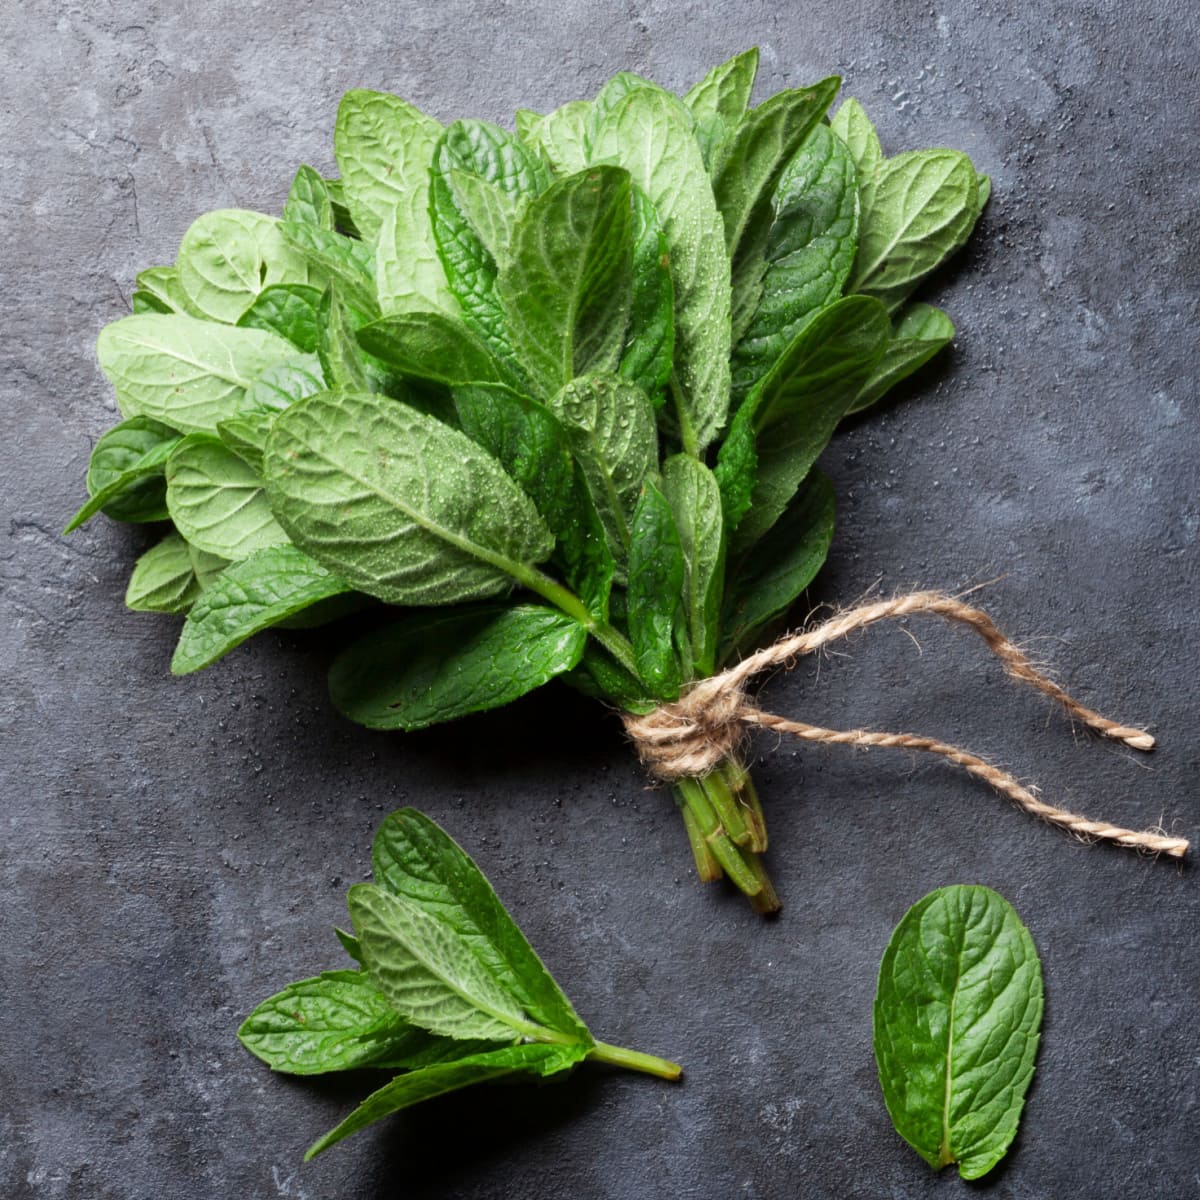 Bunch of Rope Tied Fresh Mint Leaves
on Stone Background